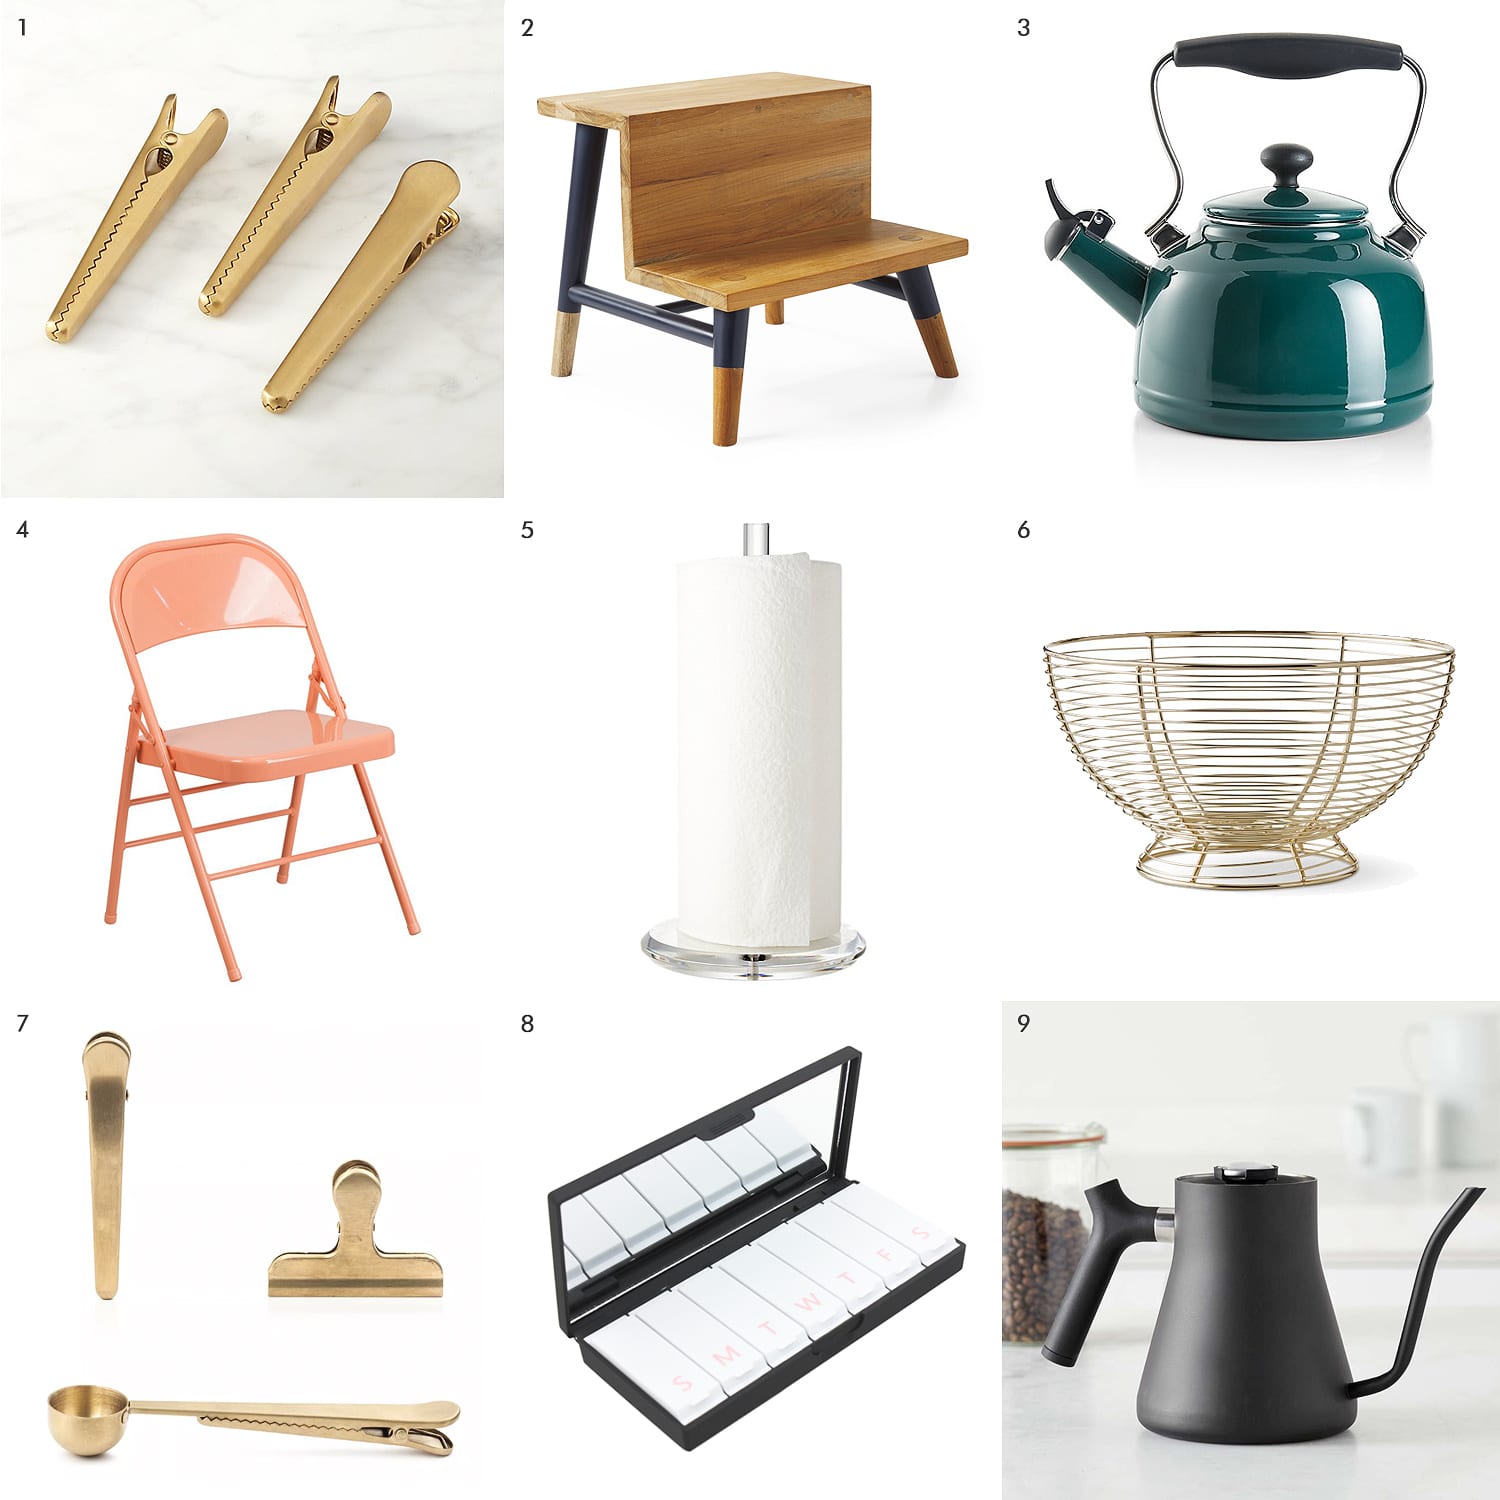 Kitchen essentials that look good in your home // attractive trash cans, folding chairs, fruit baskets, paper towel holders! // via Yellow Brick Home